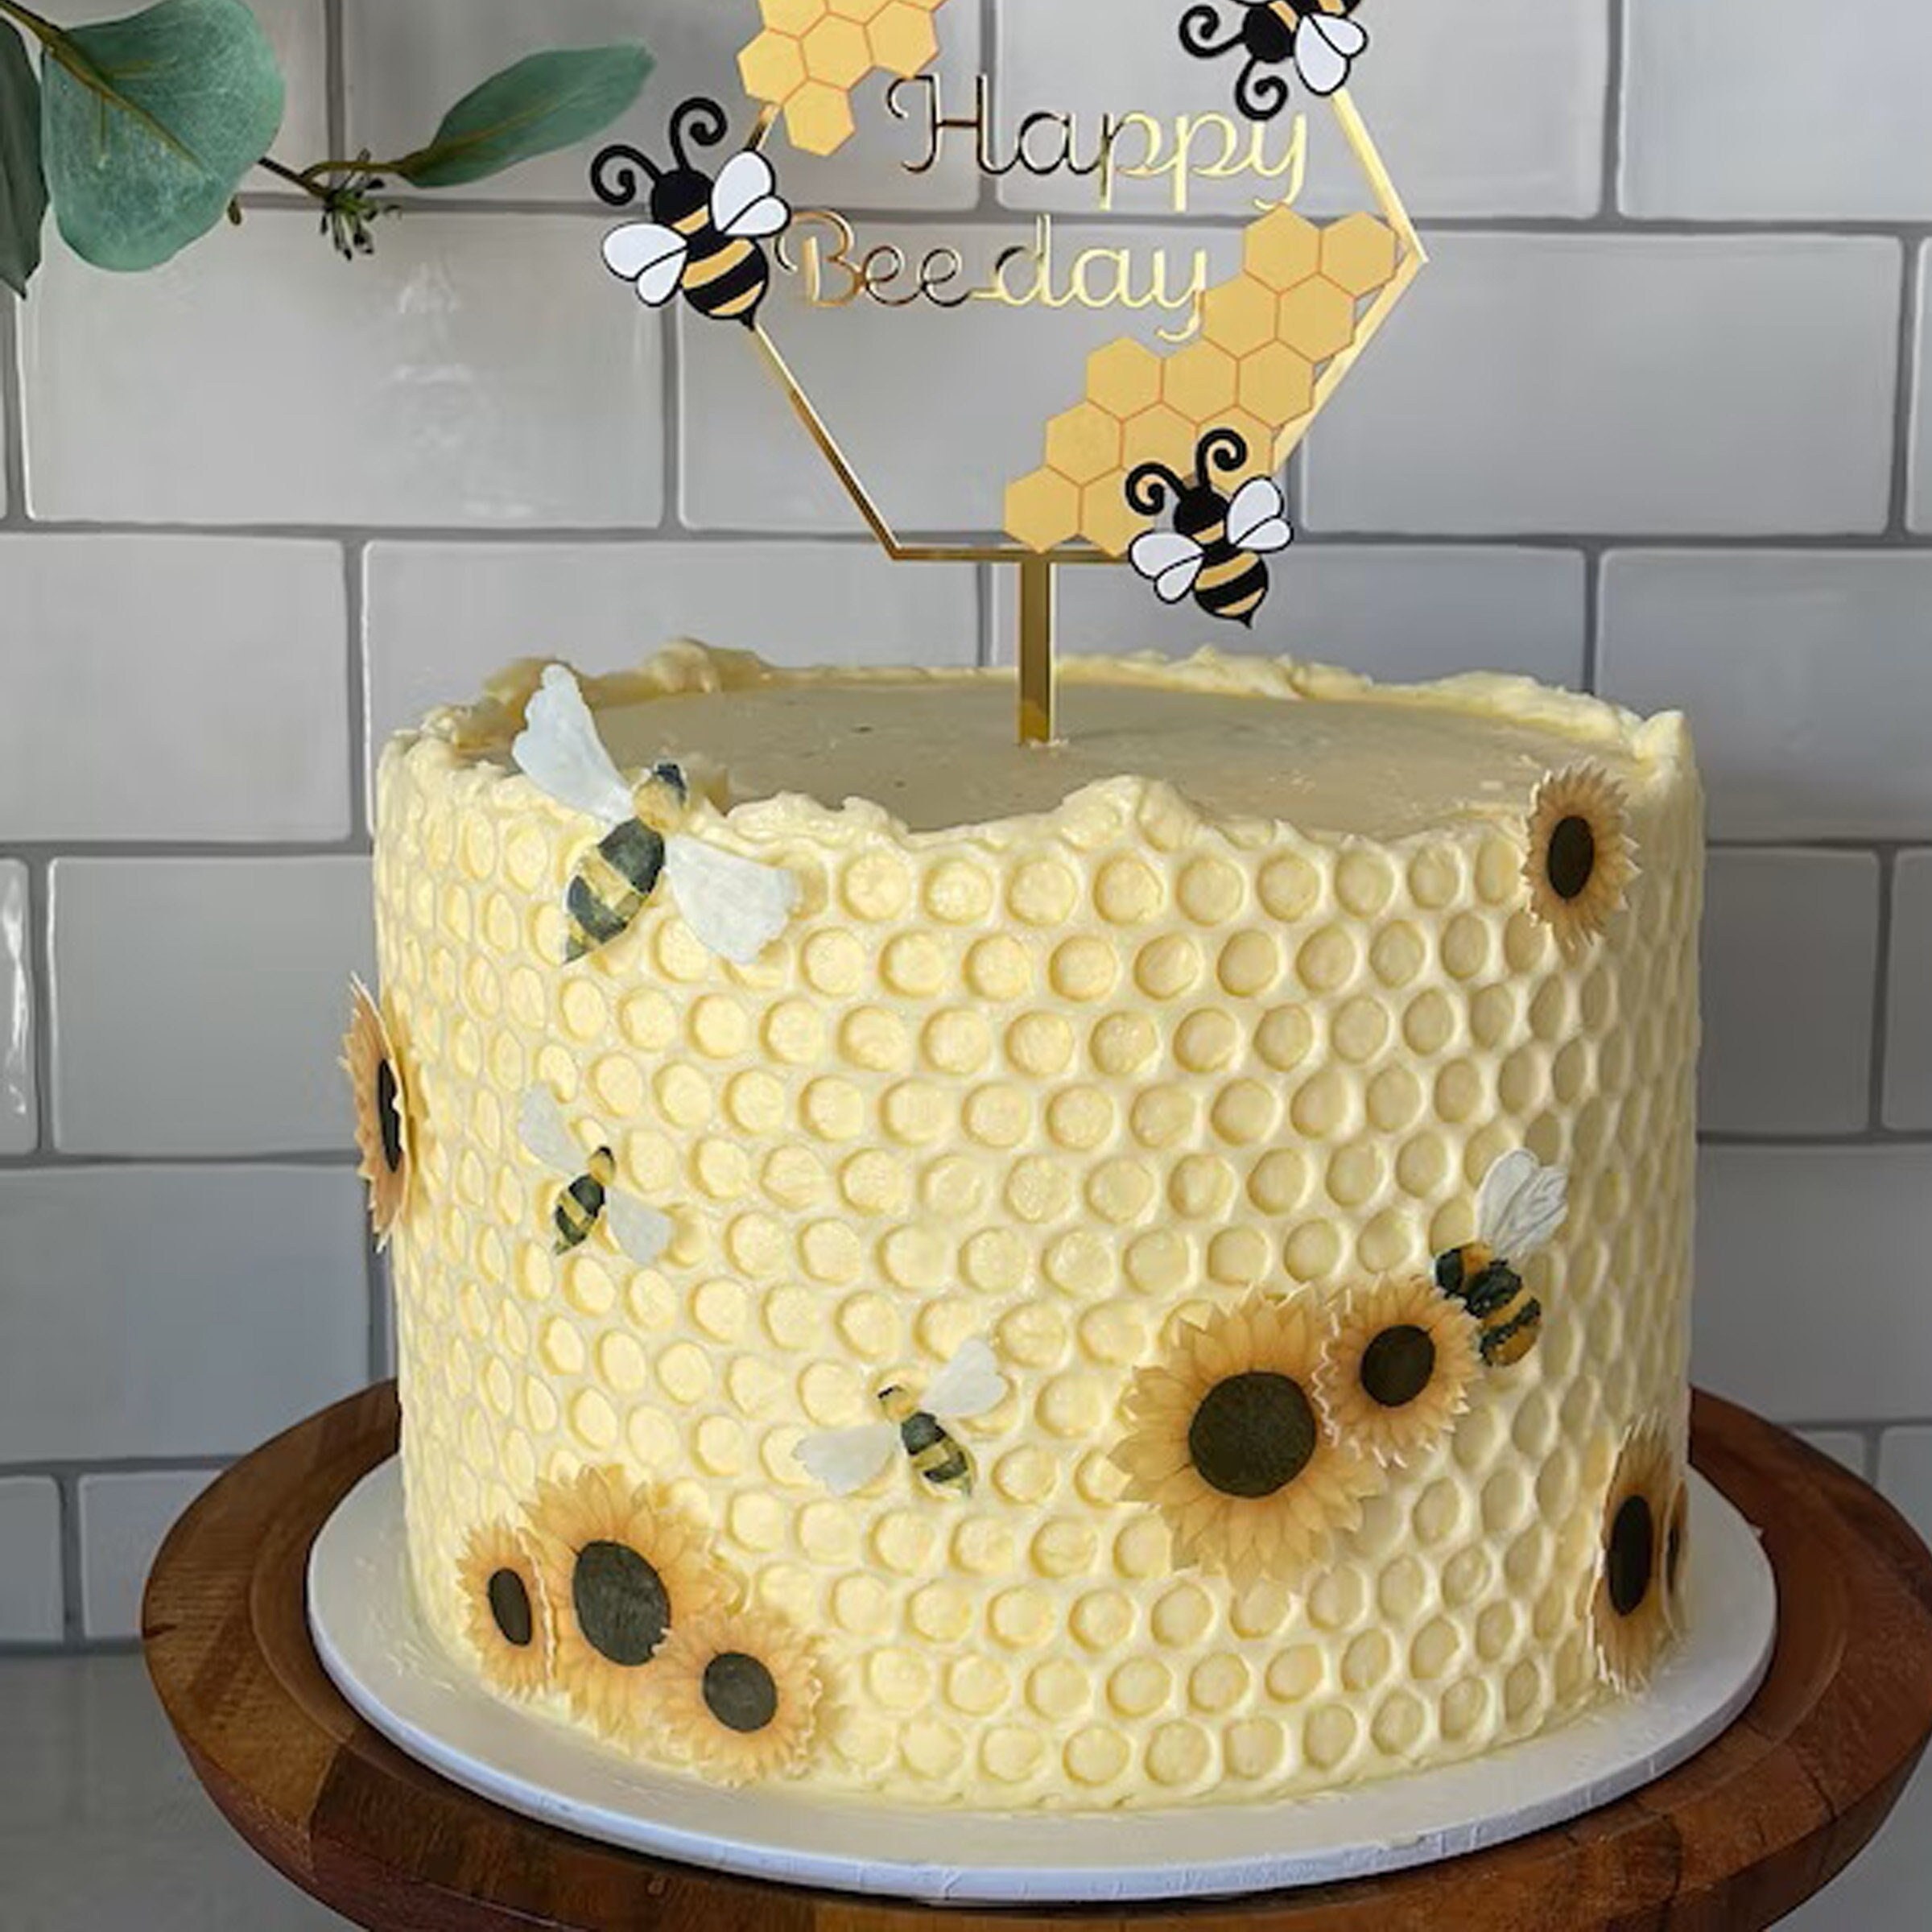 24 PRE-CUT Bees Bee Edible Wafer Cupcake Topper Cake Decoration